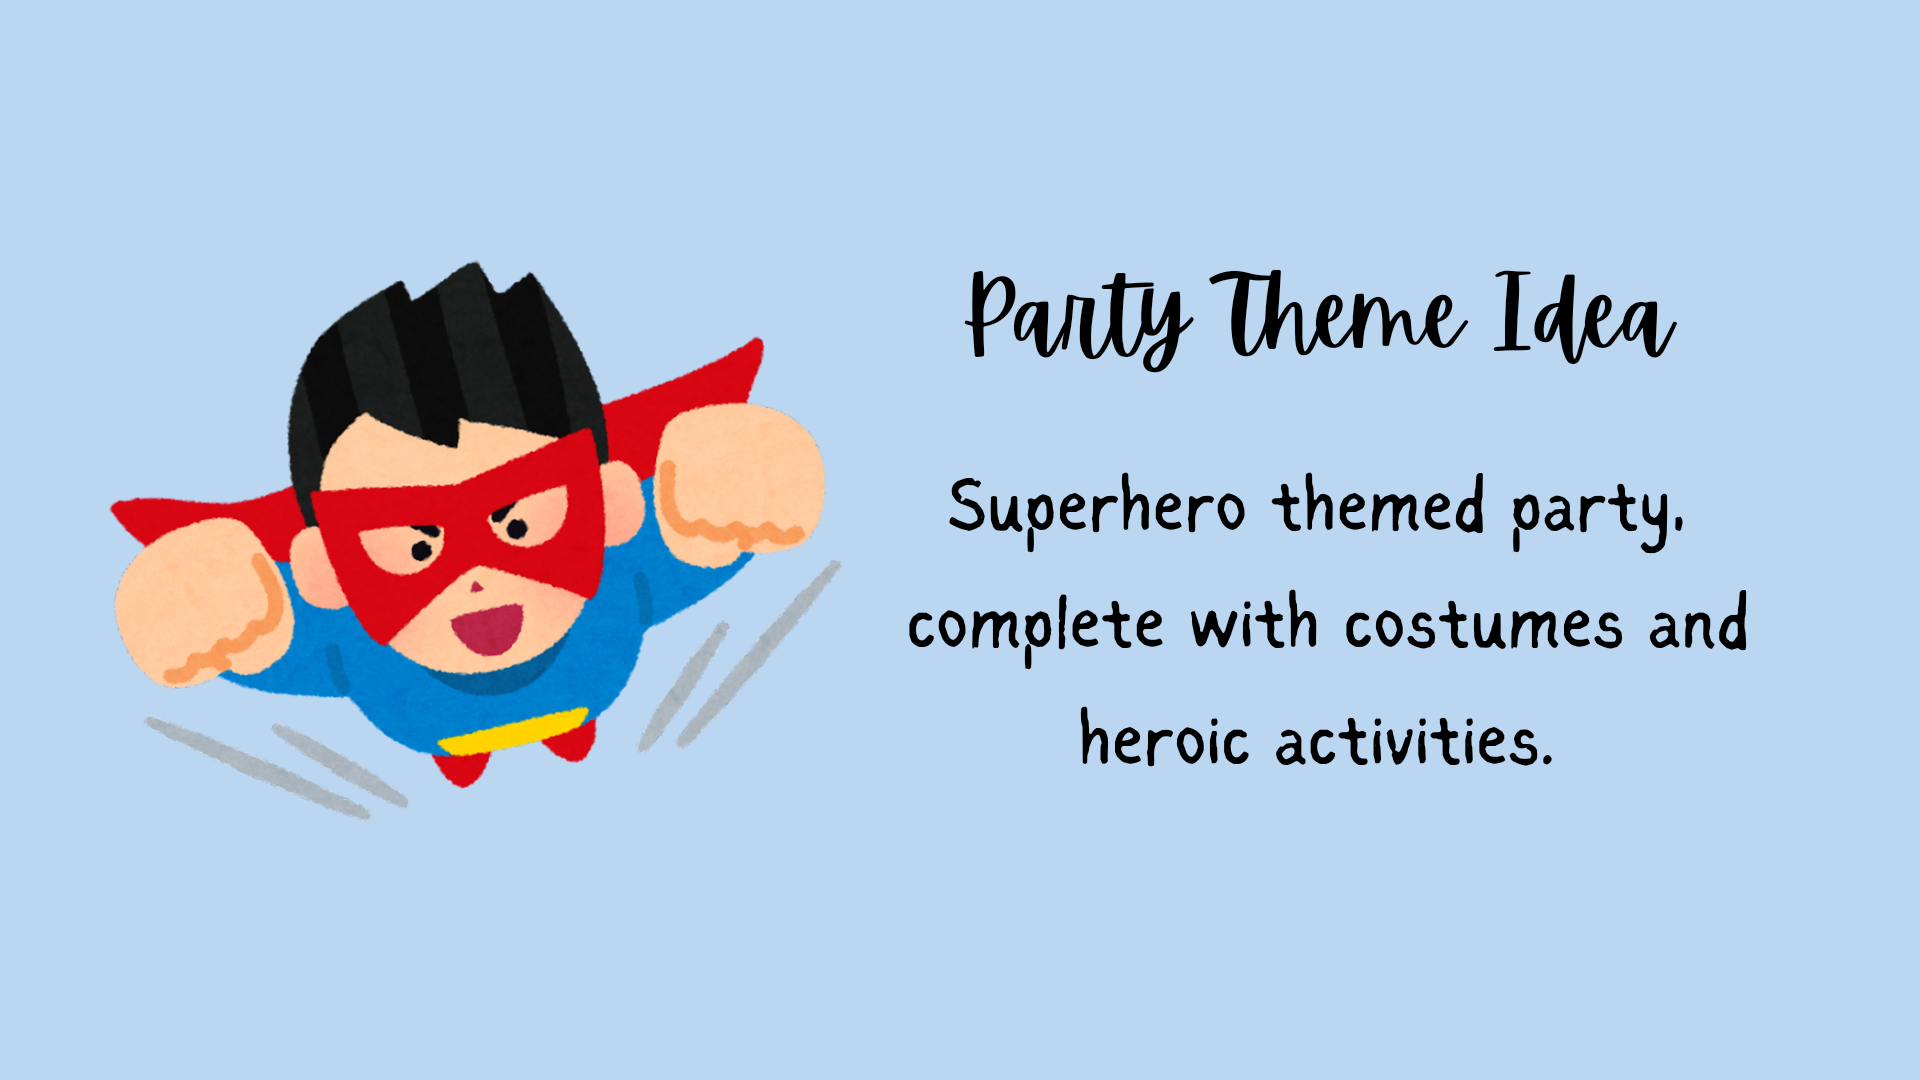 Idea for a superhero-themed birthday party, including costumes, and activities.